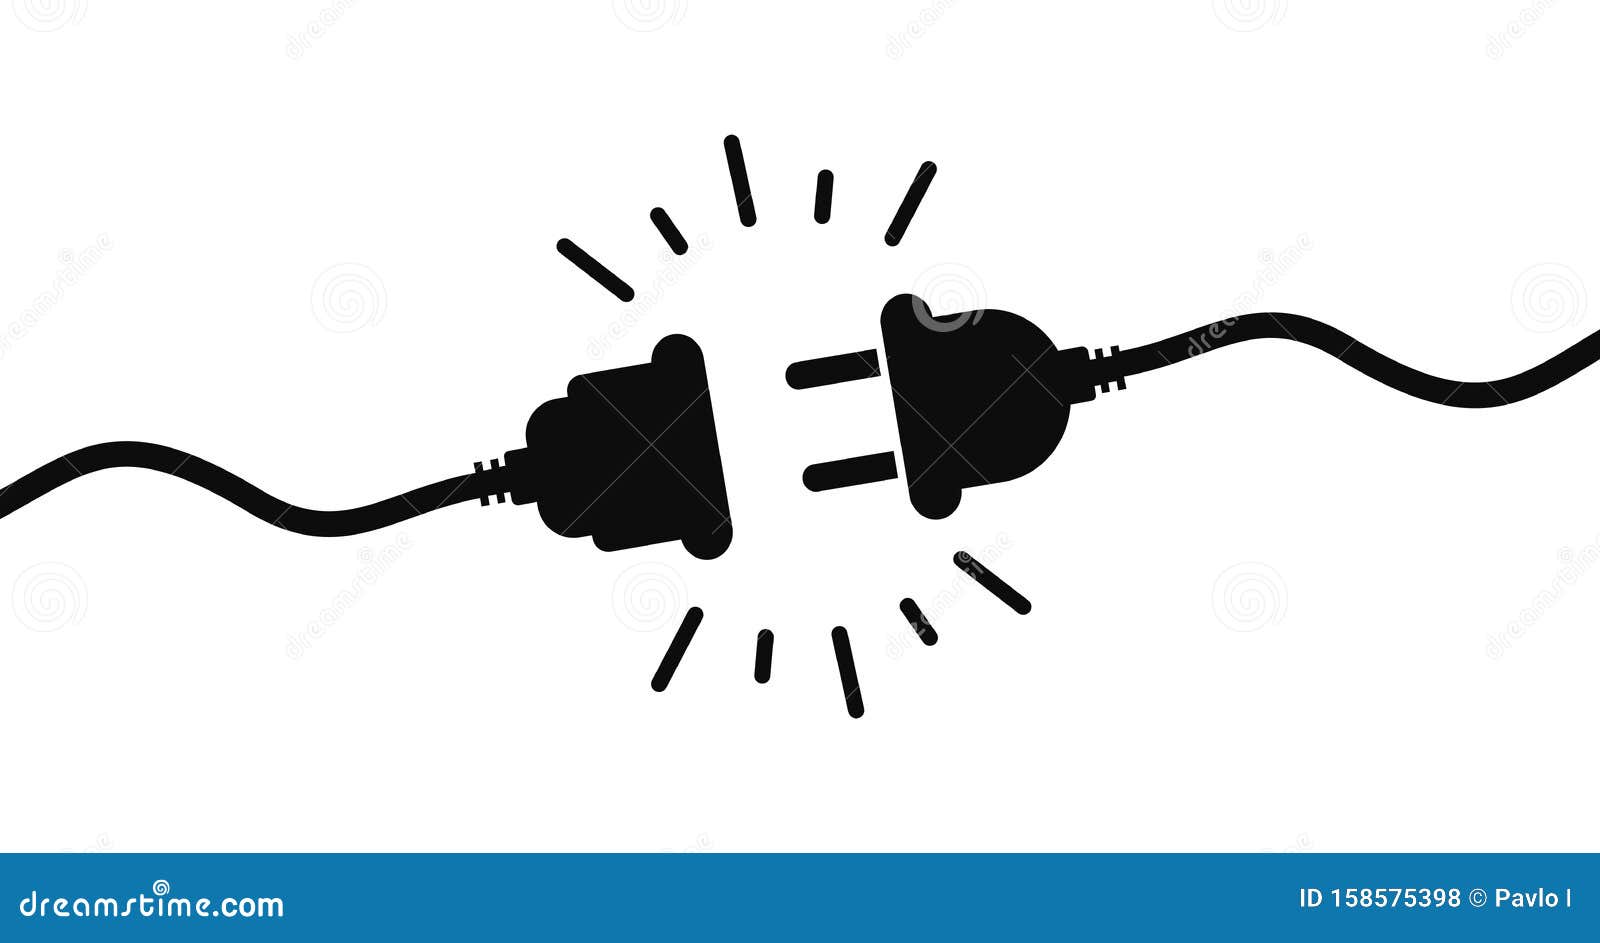 electric socket with a plug. connection and disconnection concept. concept of 404 error connection